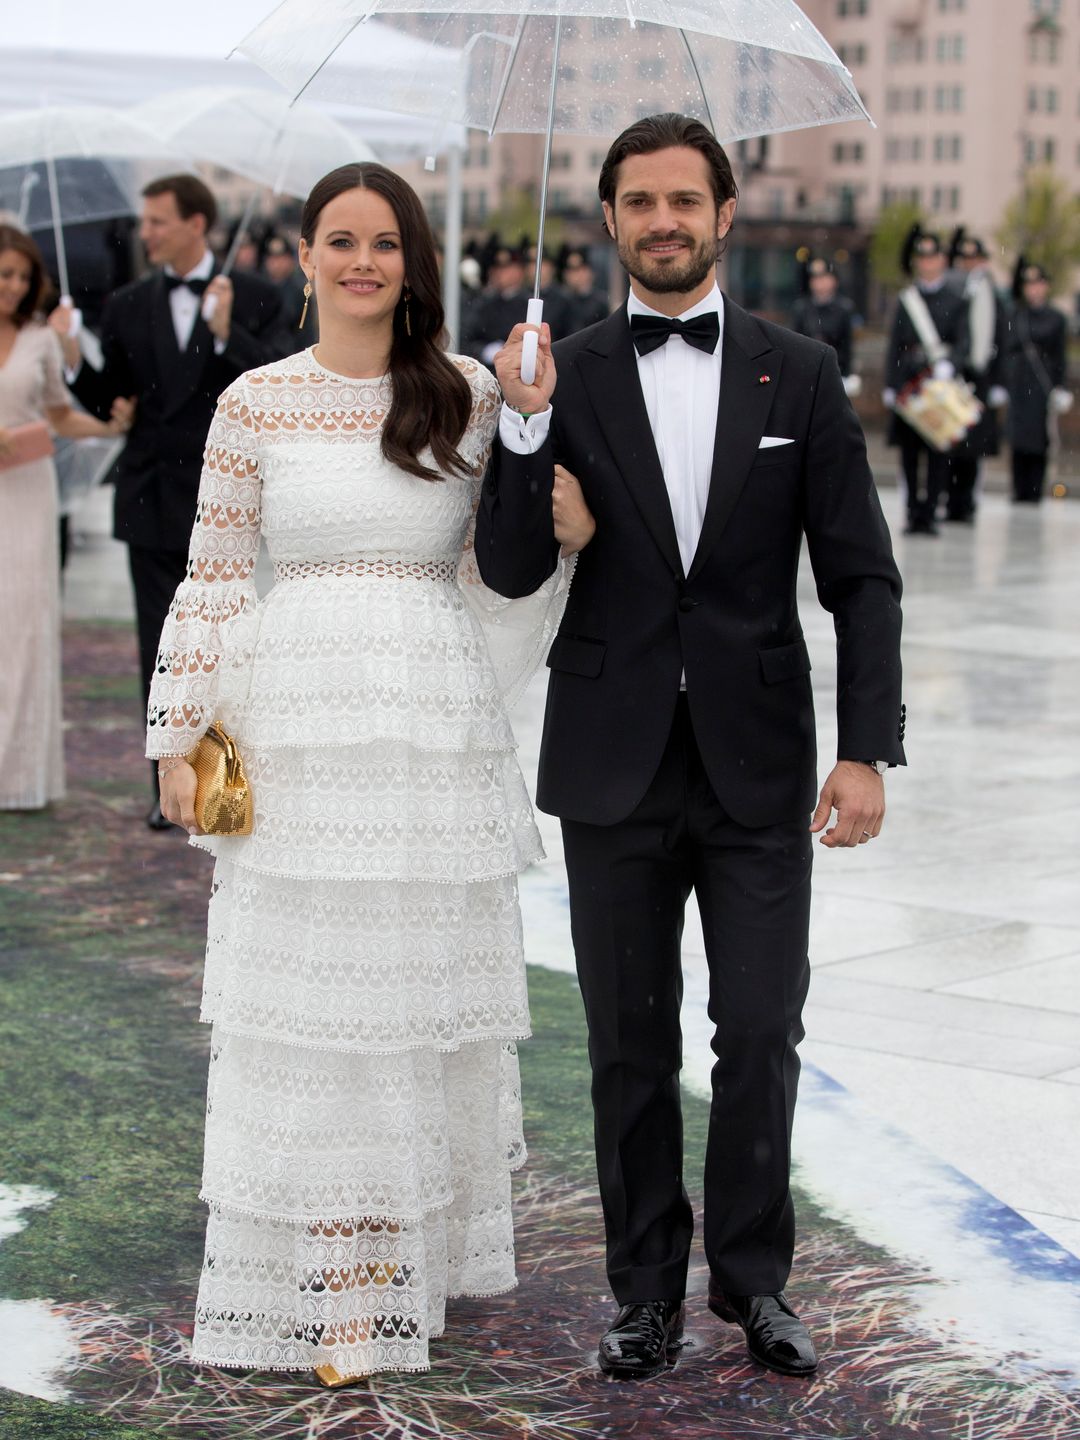 Prince Carl Philip and Princess Sofia of Sweden, attend a Gala Banquet hosted by The Government at The Opera House as part of the Celebrations of the 80th Birthdays of  King Harald and Queen Sonja of Norway